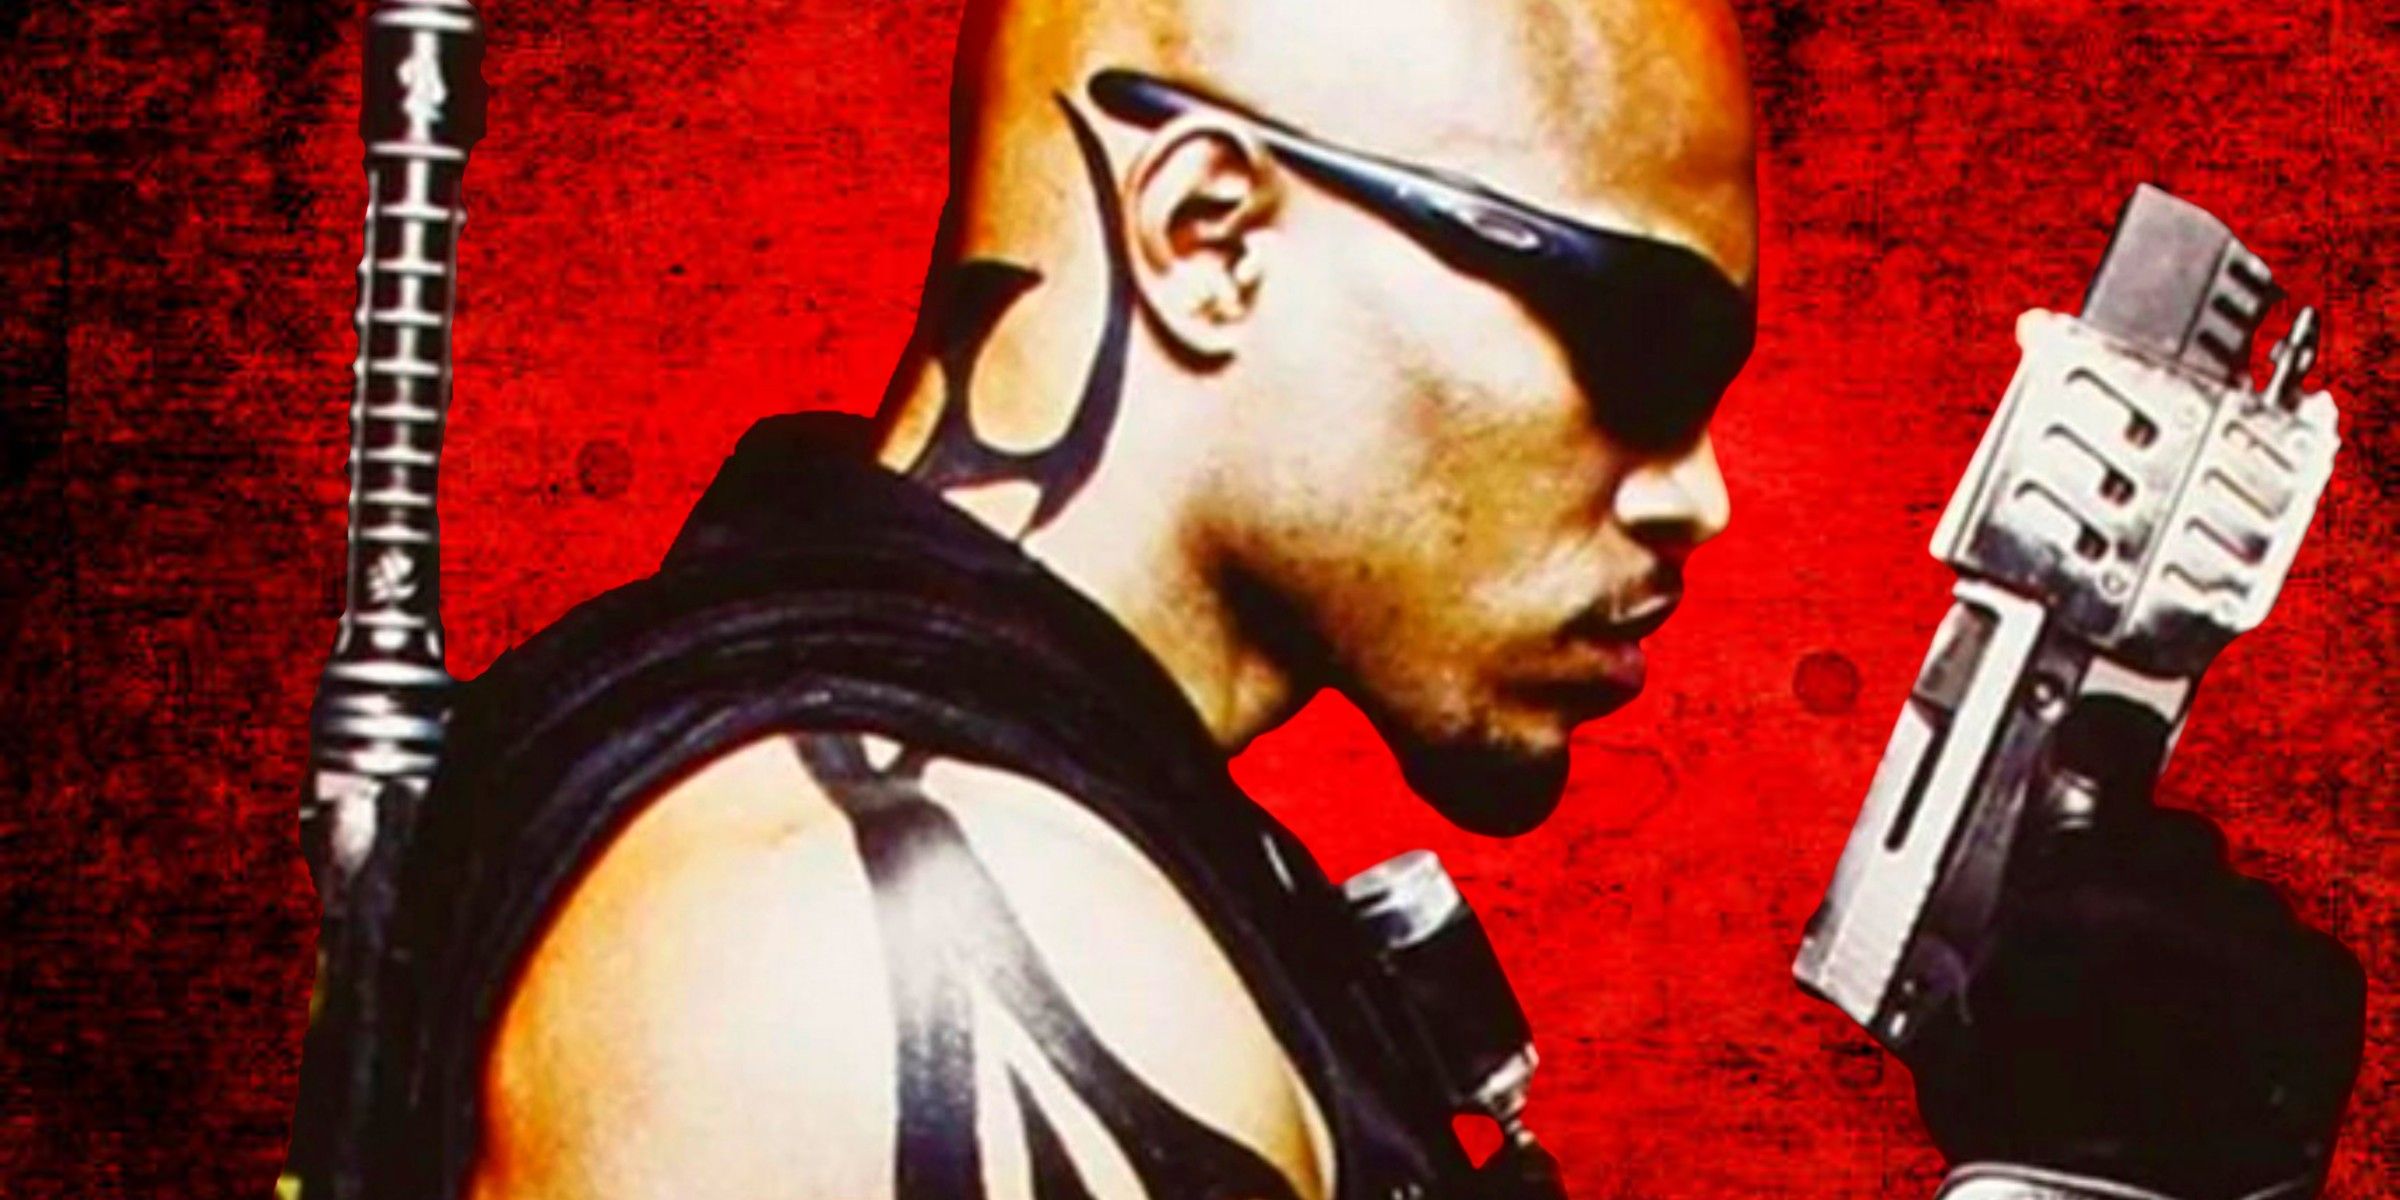 You can watch the underrated Blade show that everyone forgot about for free